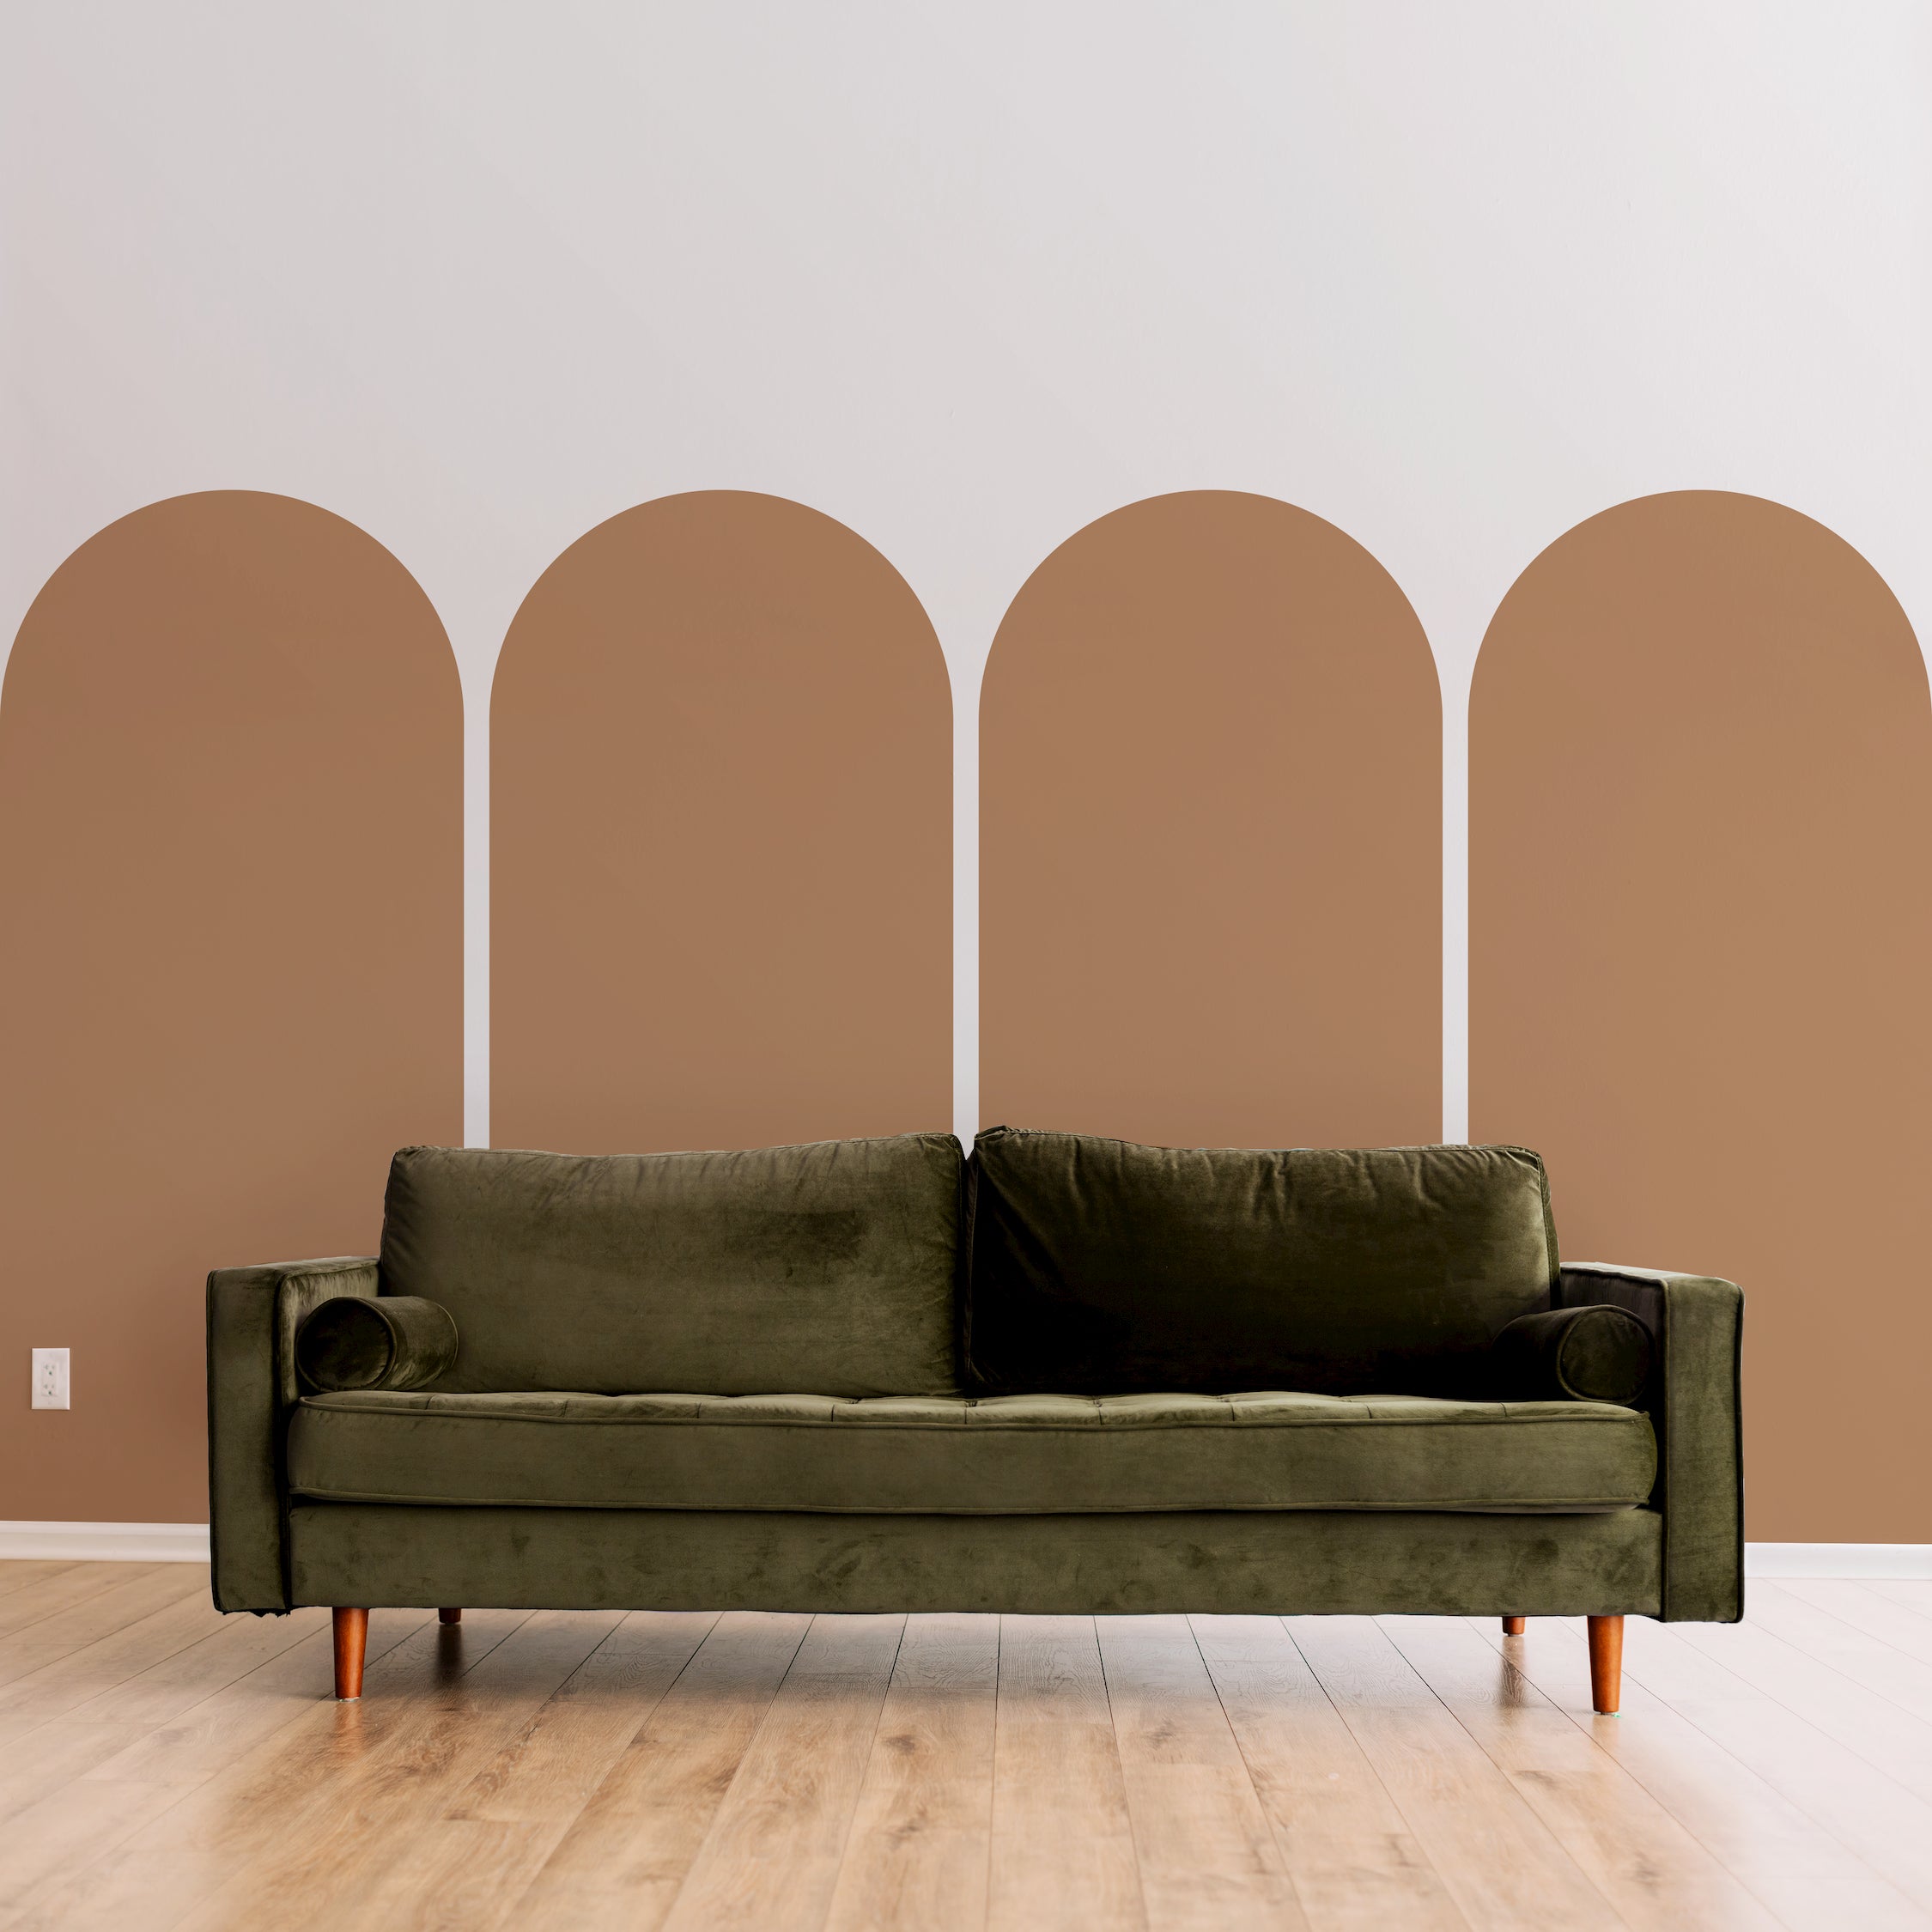 Double Arch Wall Decal Set Wallerycp - Free Shipping